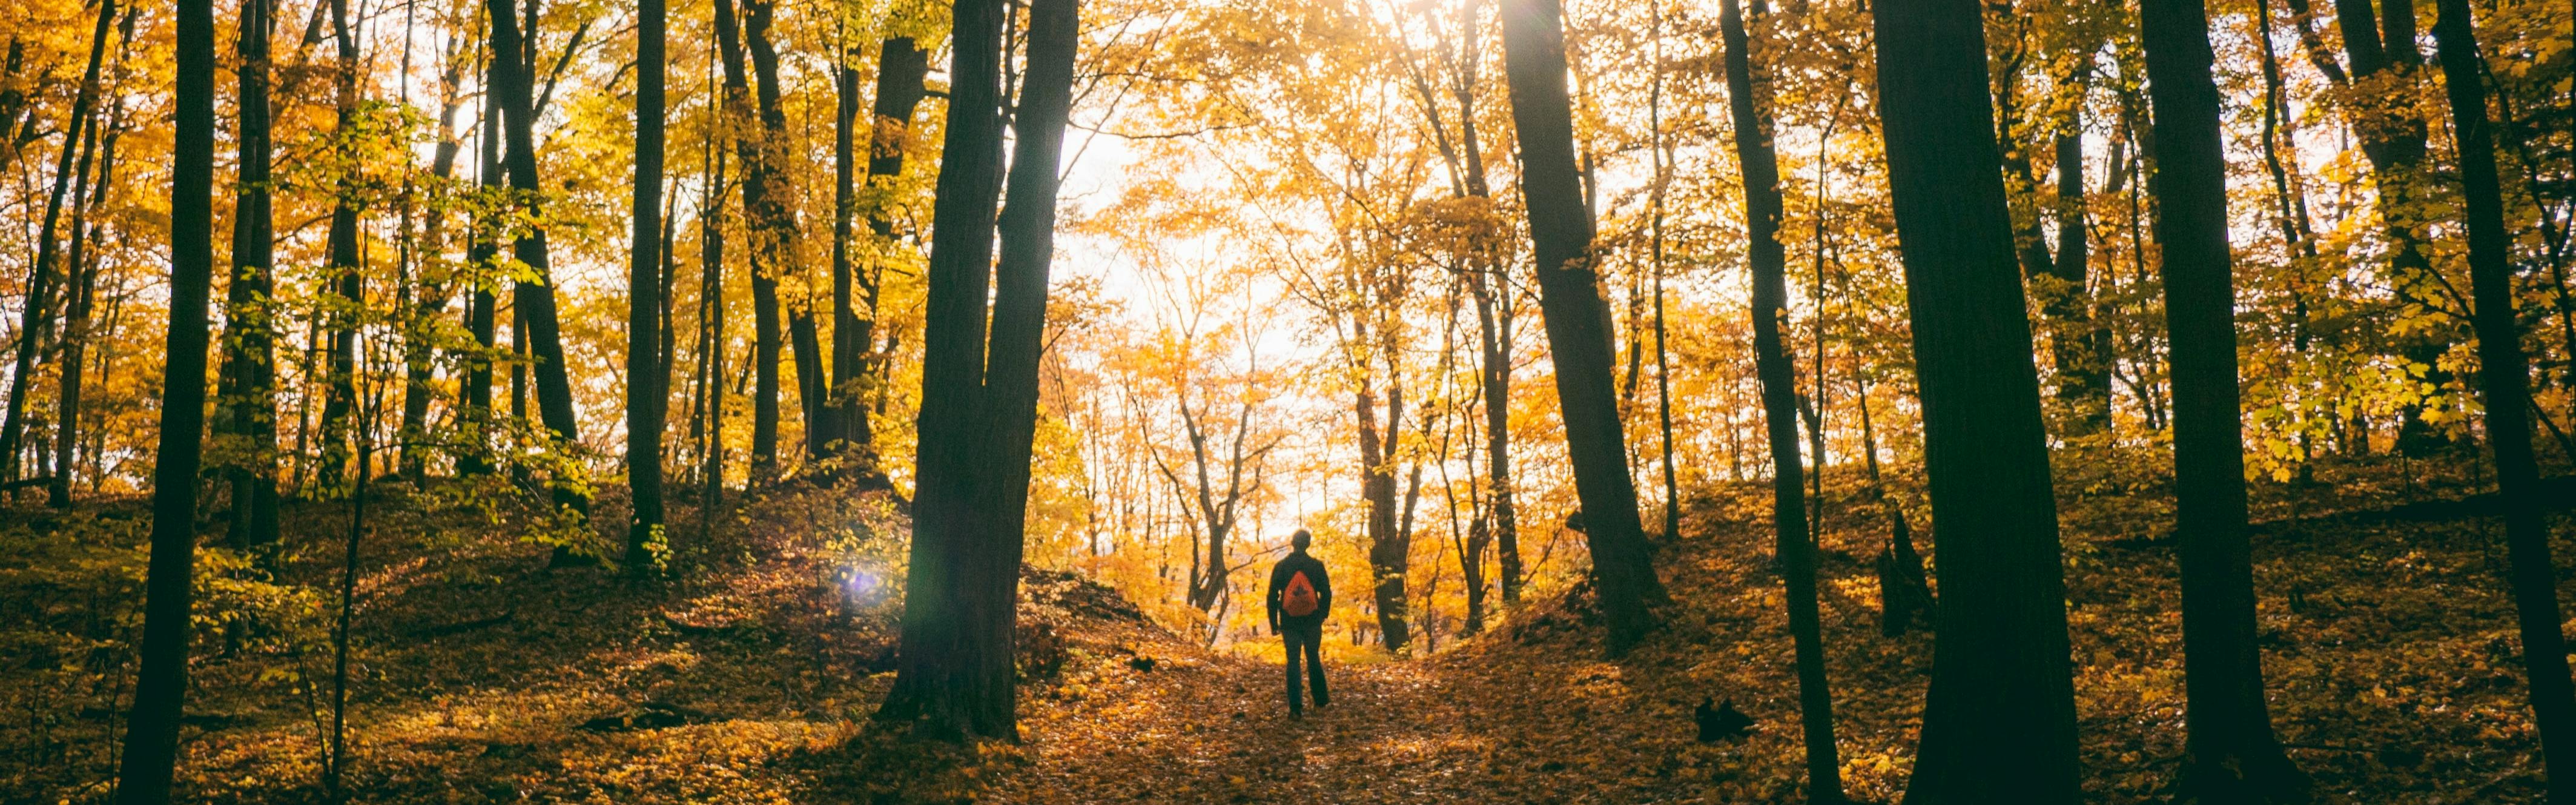 A mna walks on a path through yellow-leaved trees with his back to the camera. 